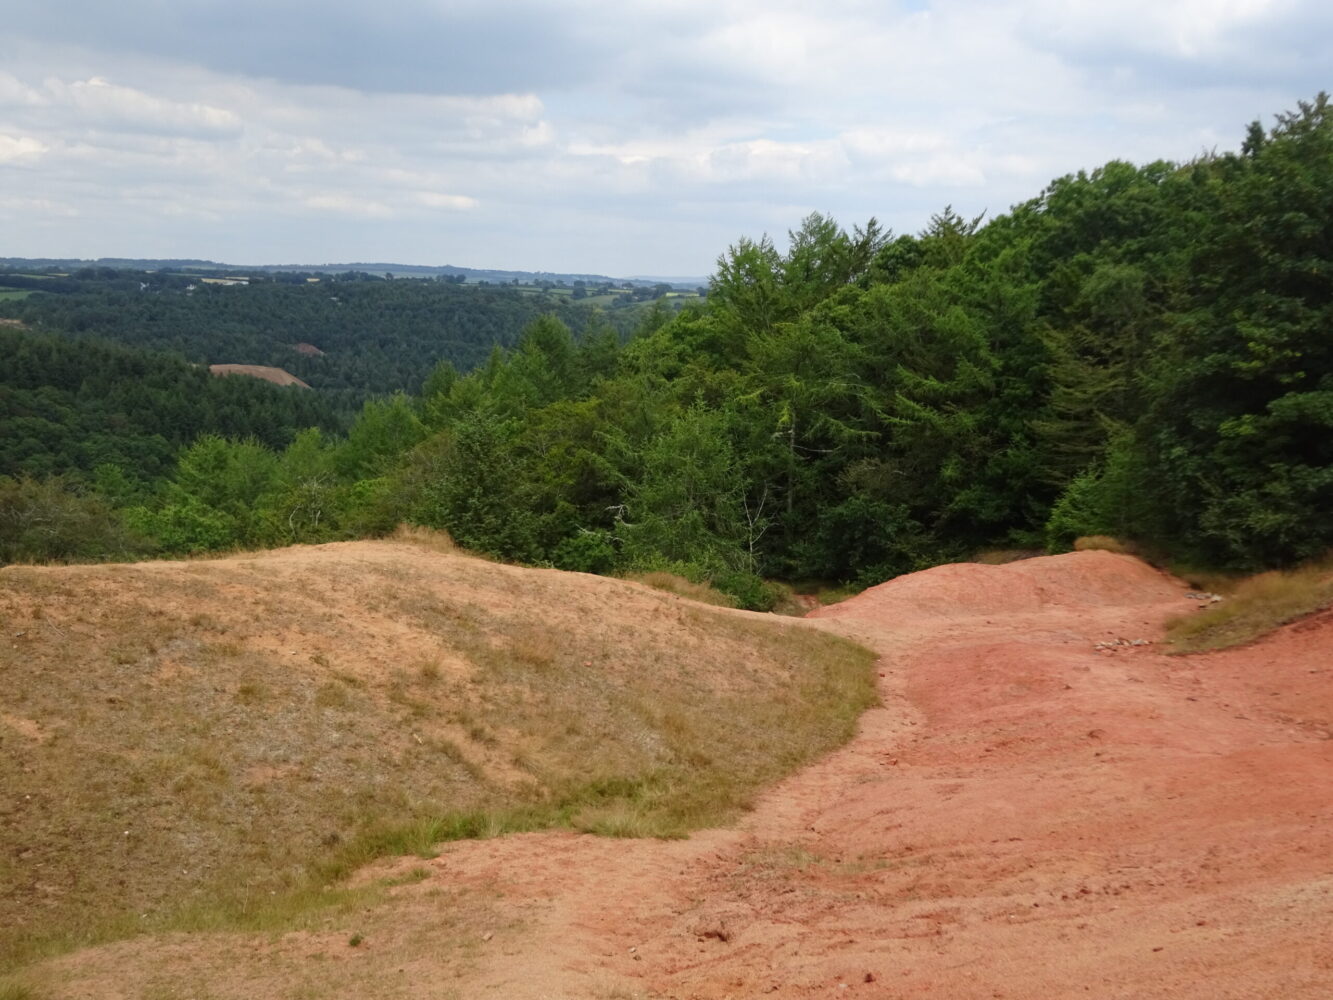 Redsands spoil heaps, looking towards Devon Great Consols on the east side of the Tamar Valley